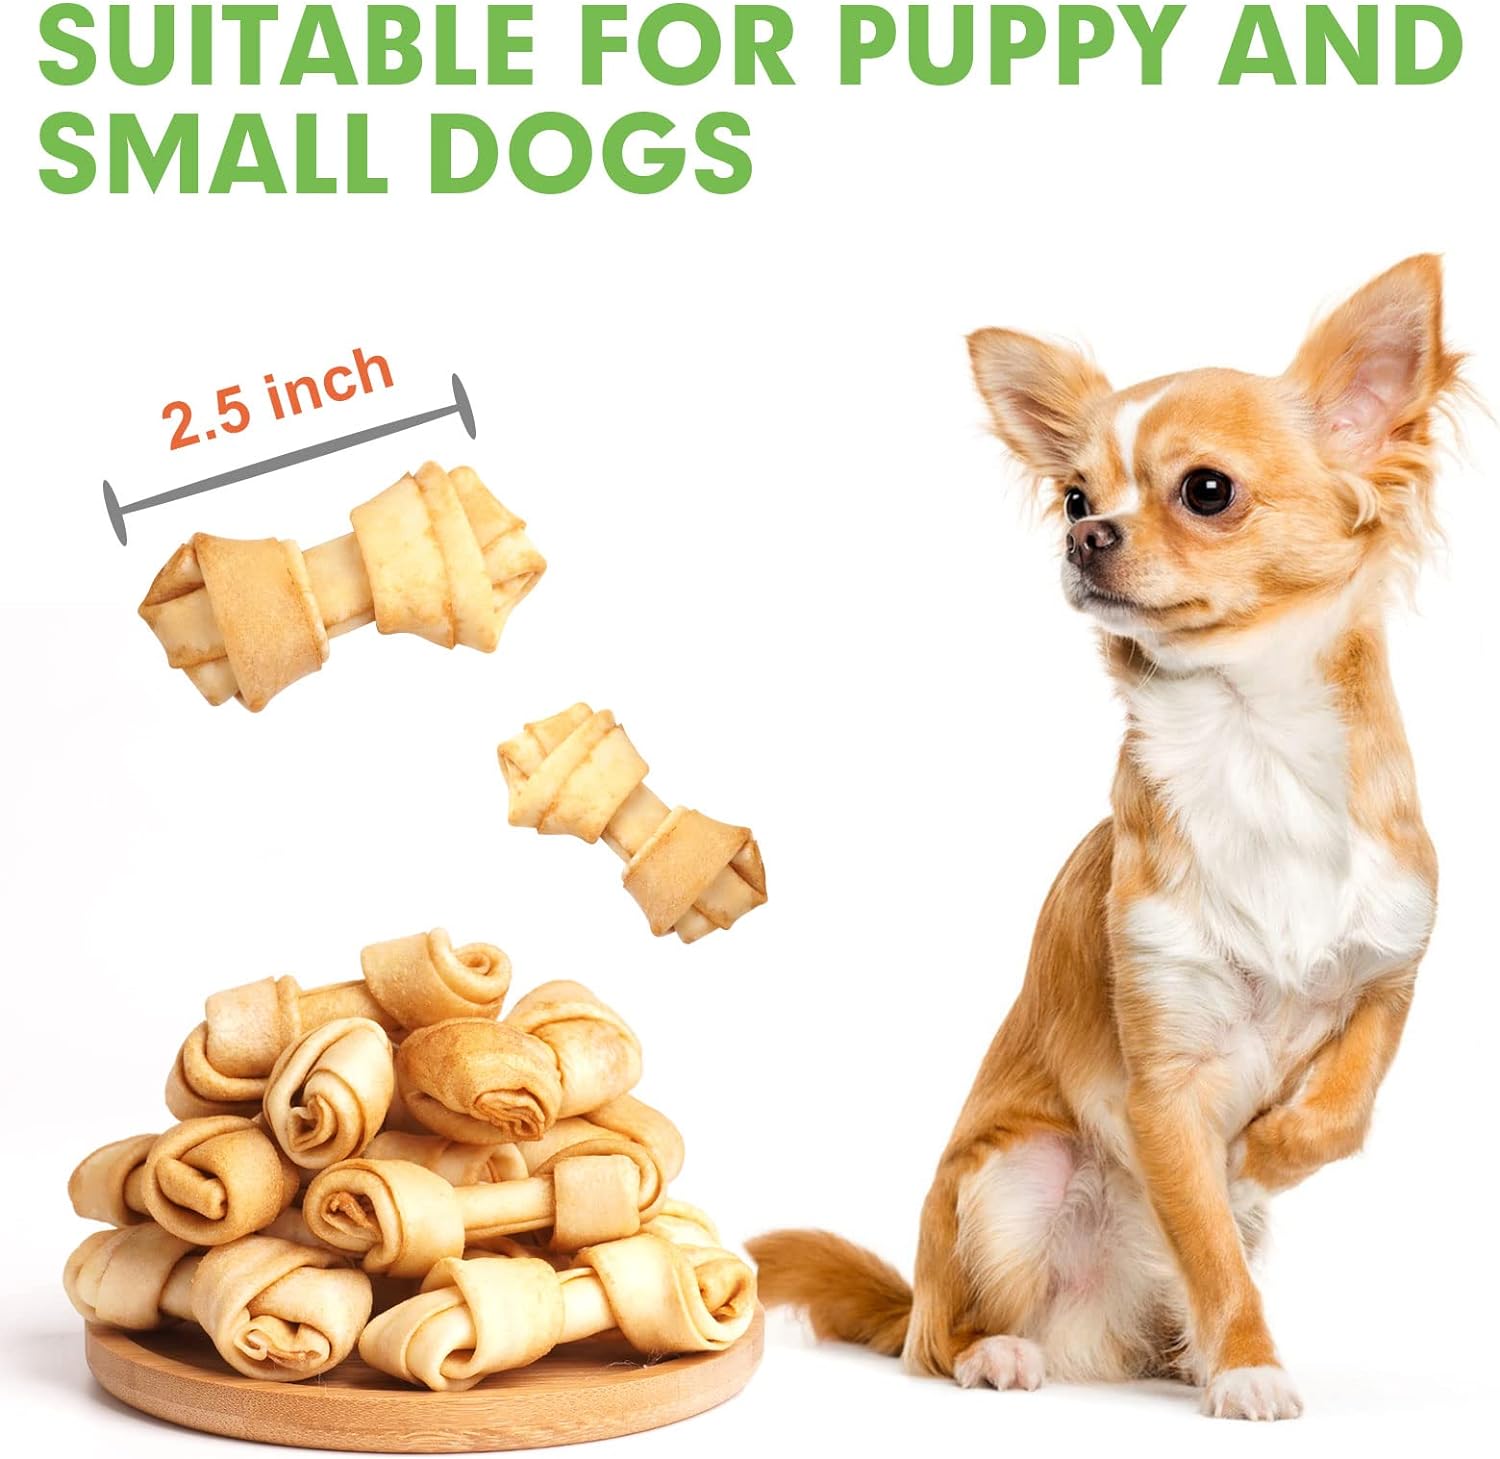 MON2SUN Dog Rawhide Knot Bones Small Rawhide Bones Mini Dog Chews Chicken Flavour 2.5 Inch 100 Count for Puppy and Small Dogs : Pet Supplies